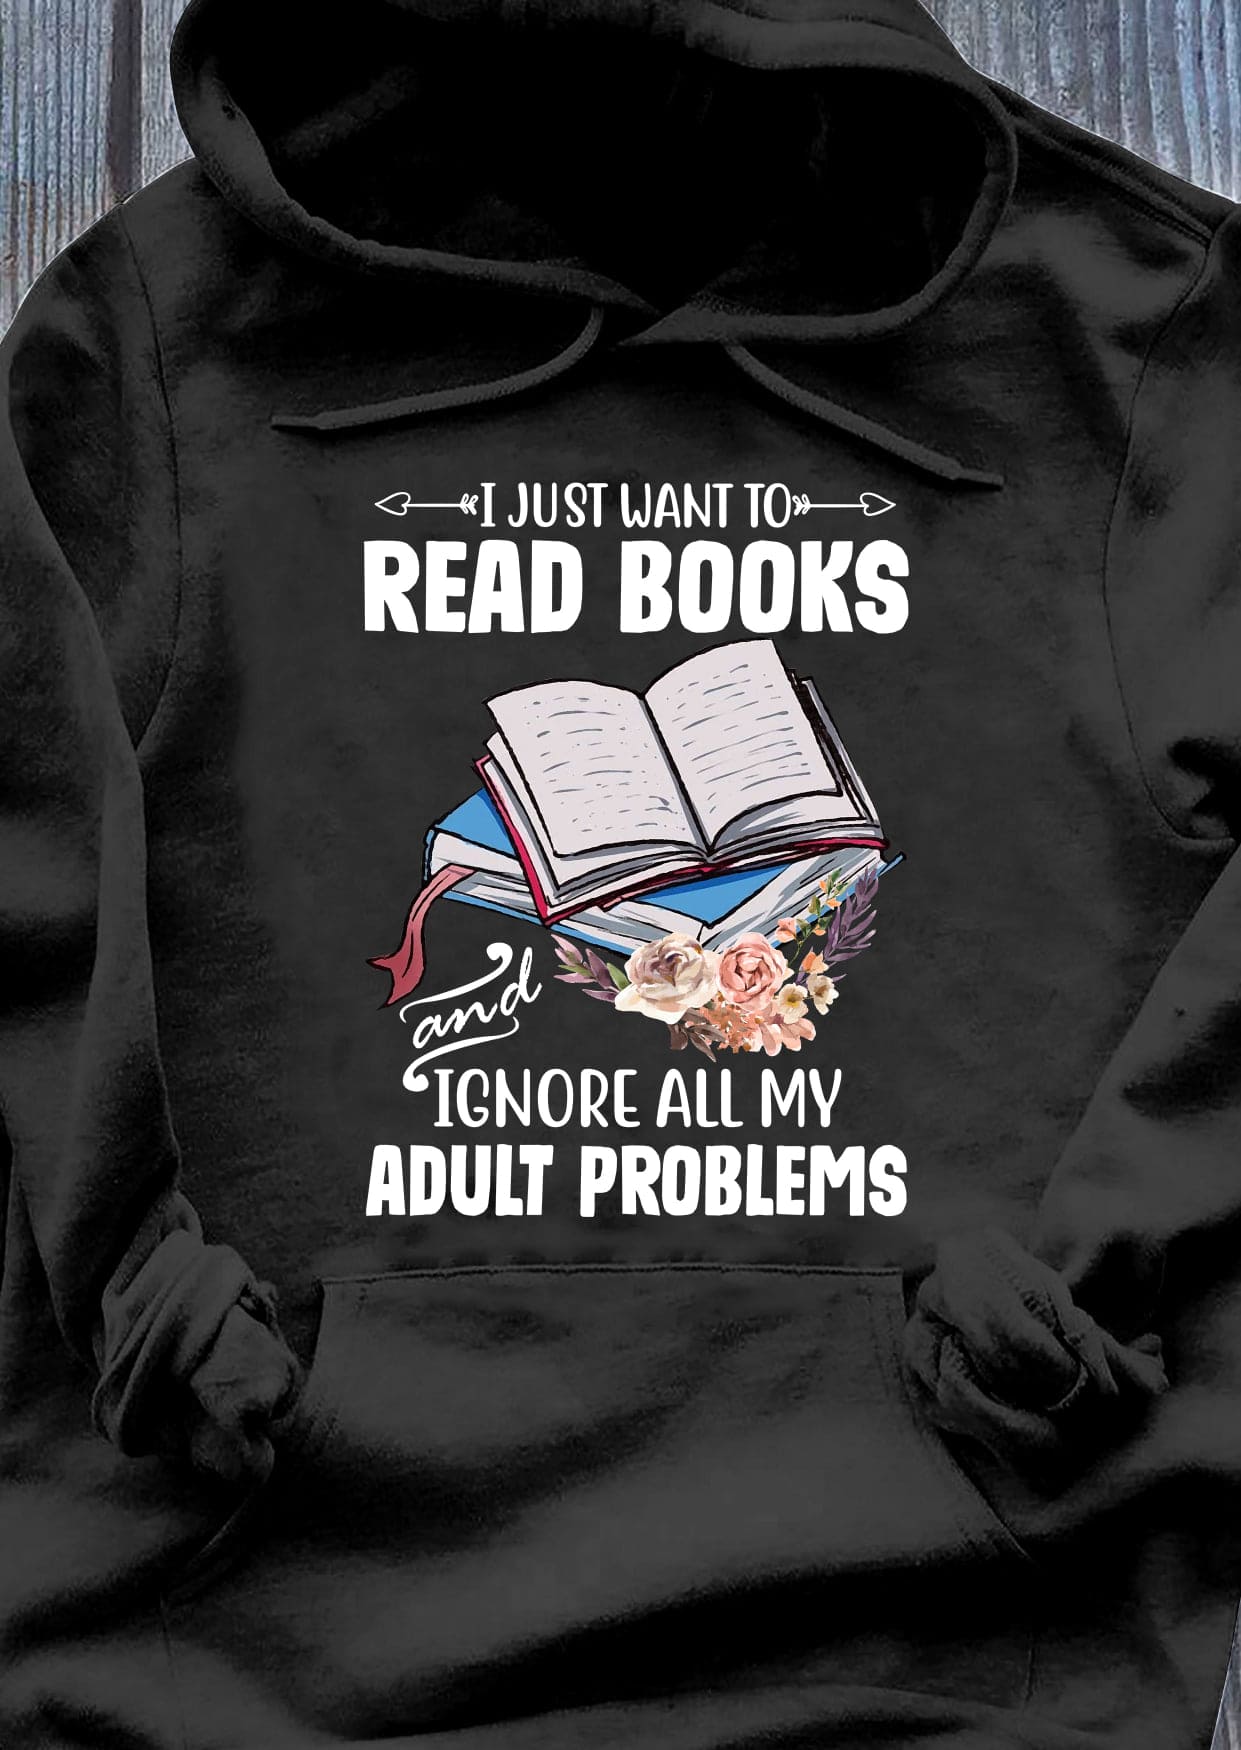 Books Graphic T-shirt - I just want to read books and ignore all my adult problems